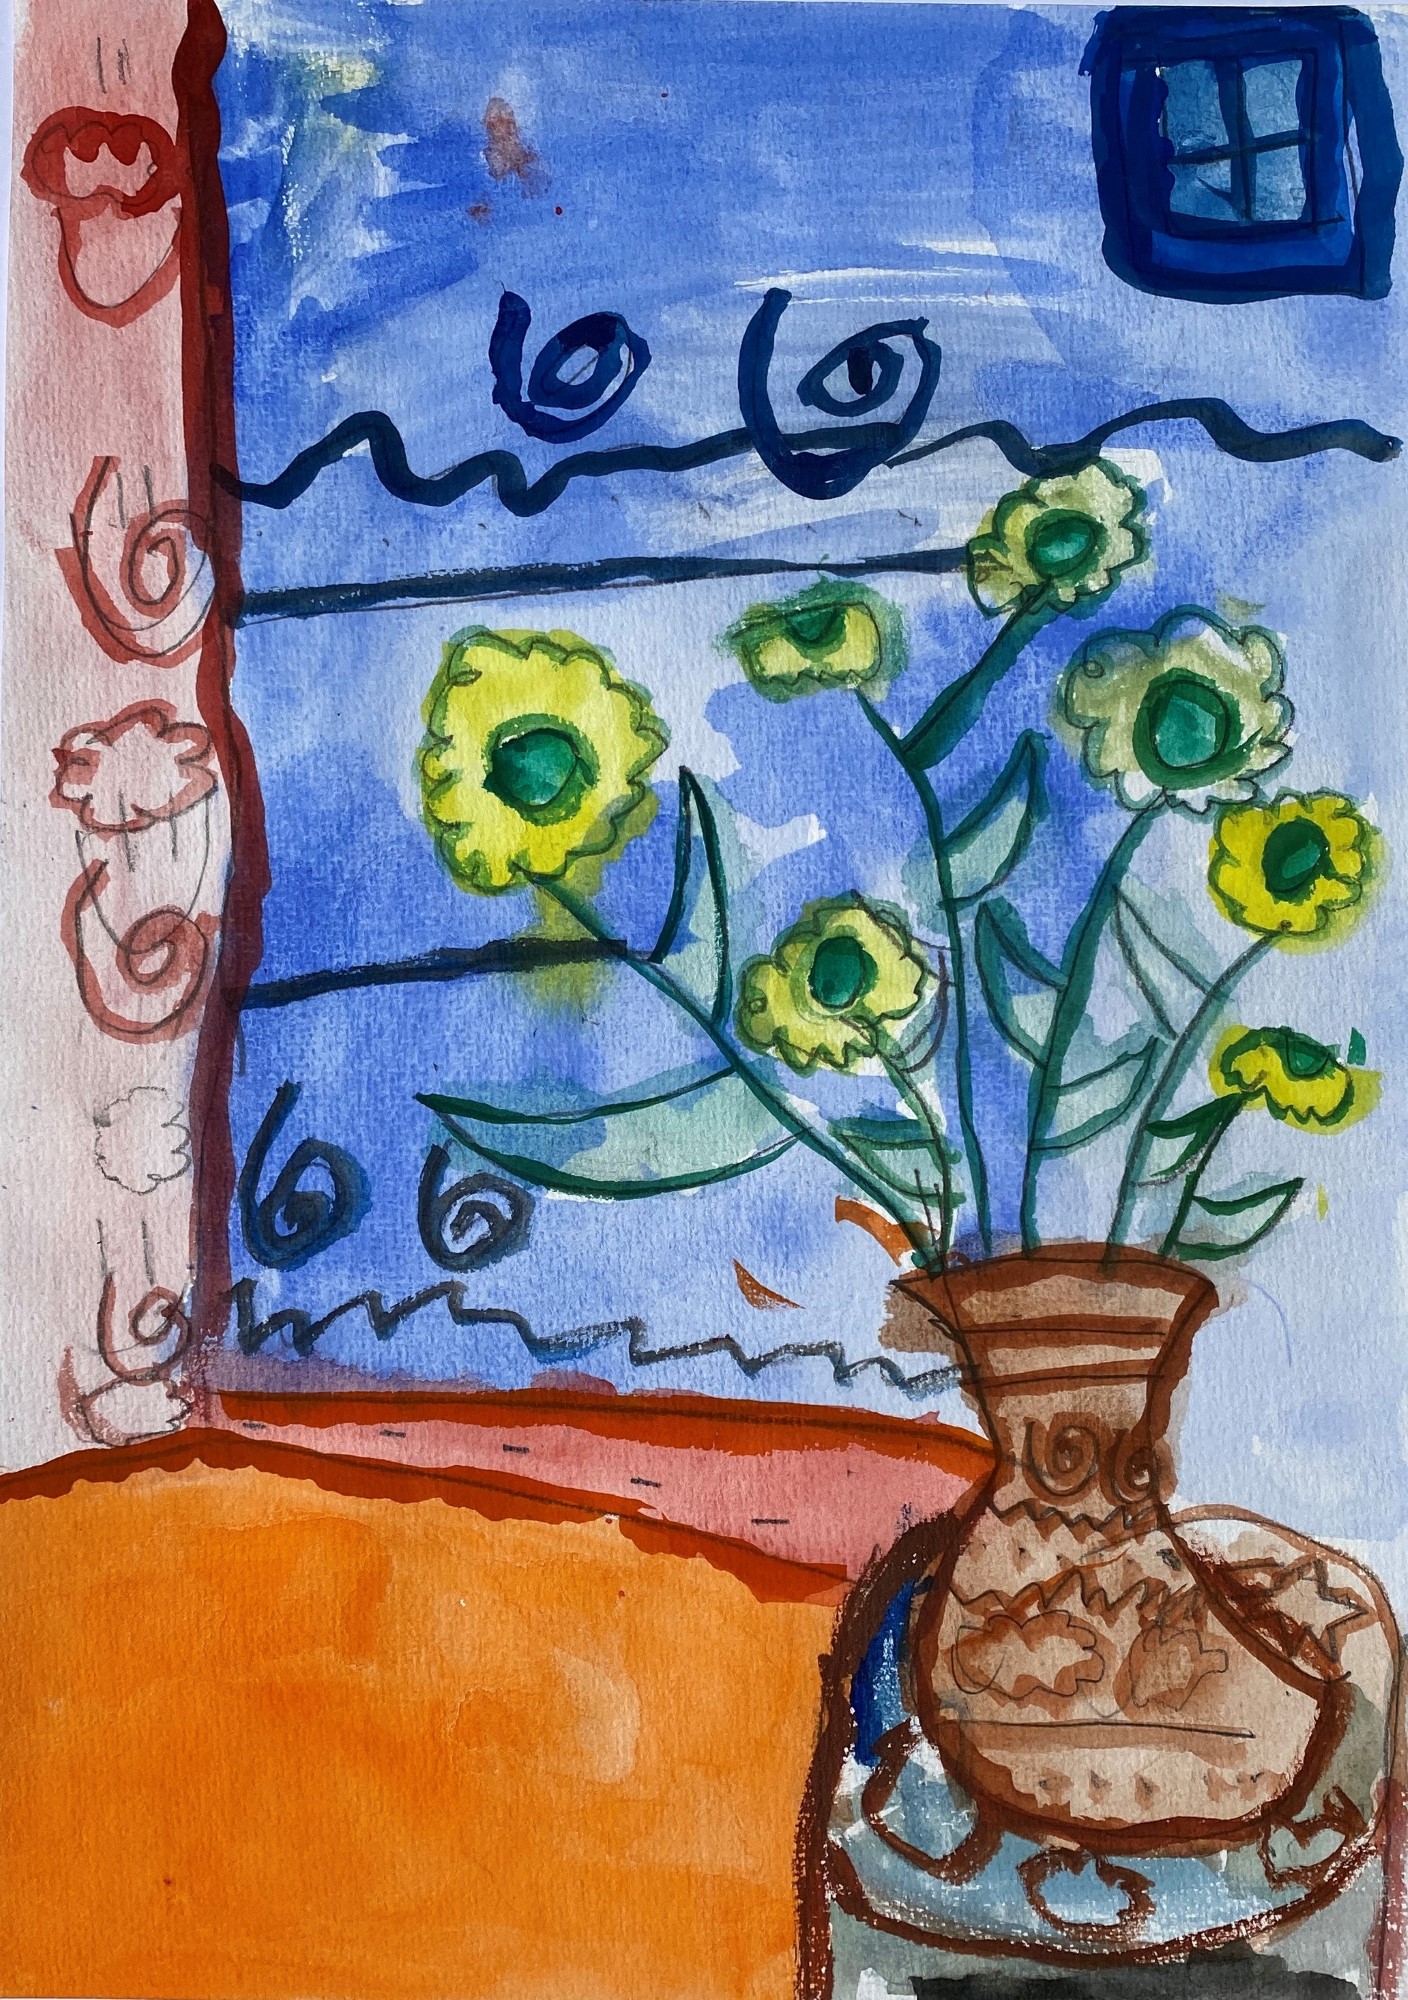 student artwork - still life with flowers